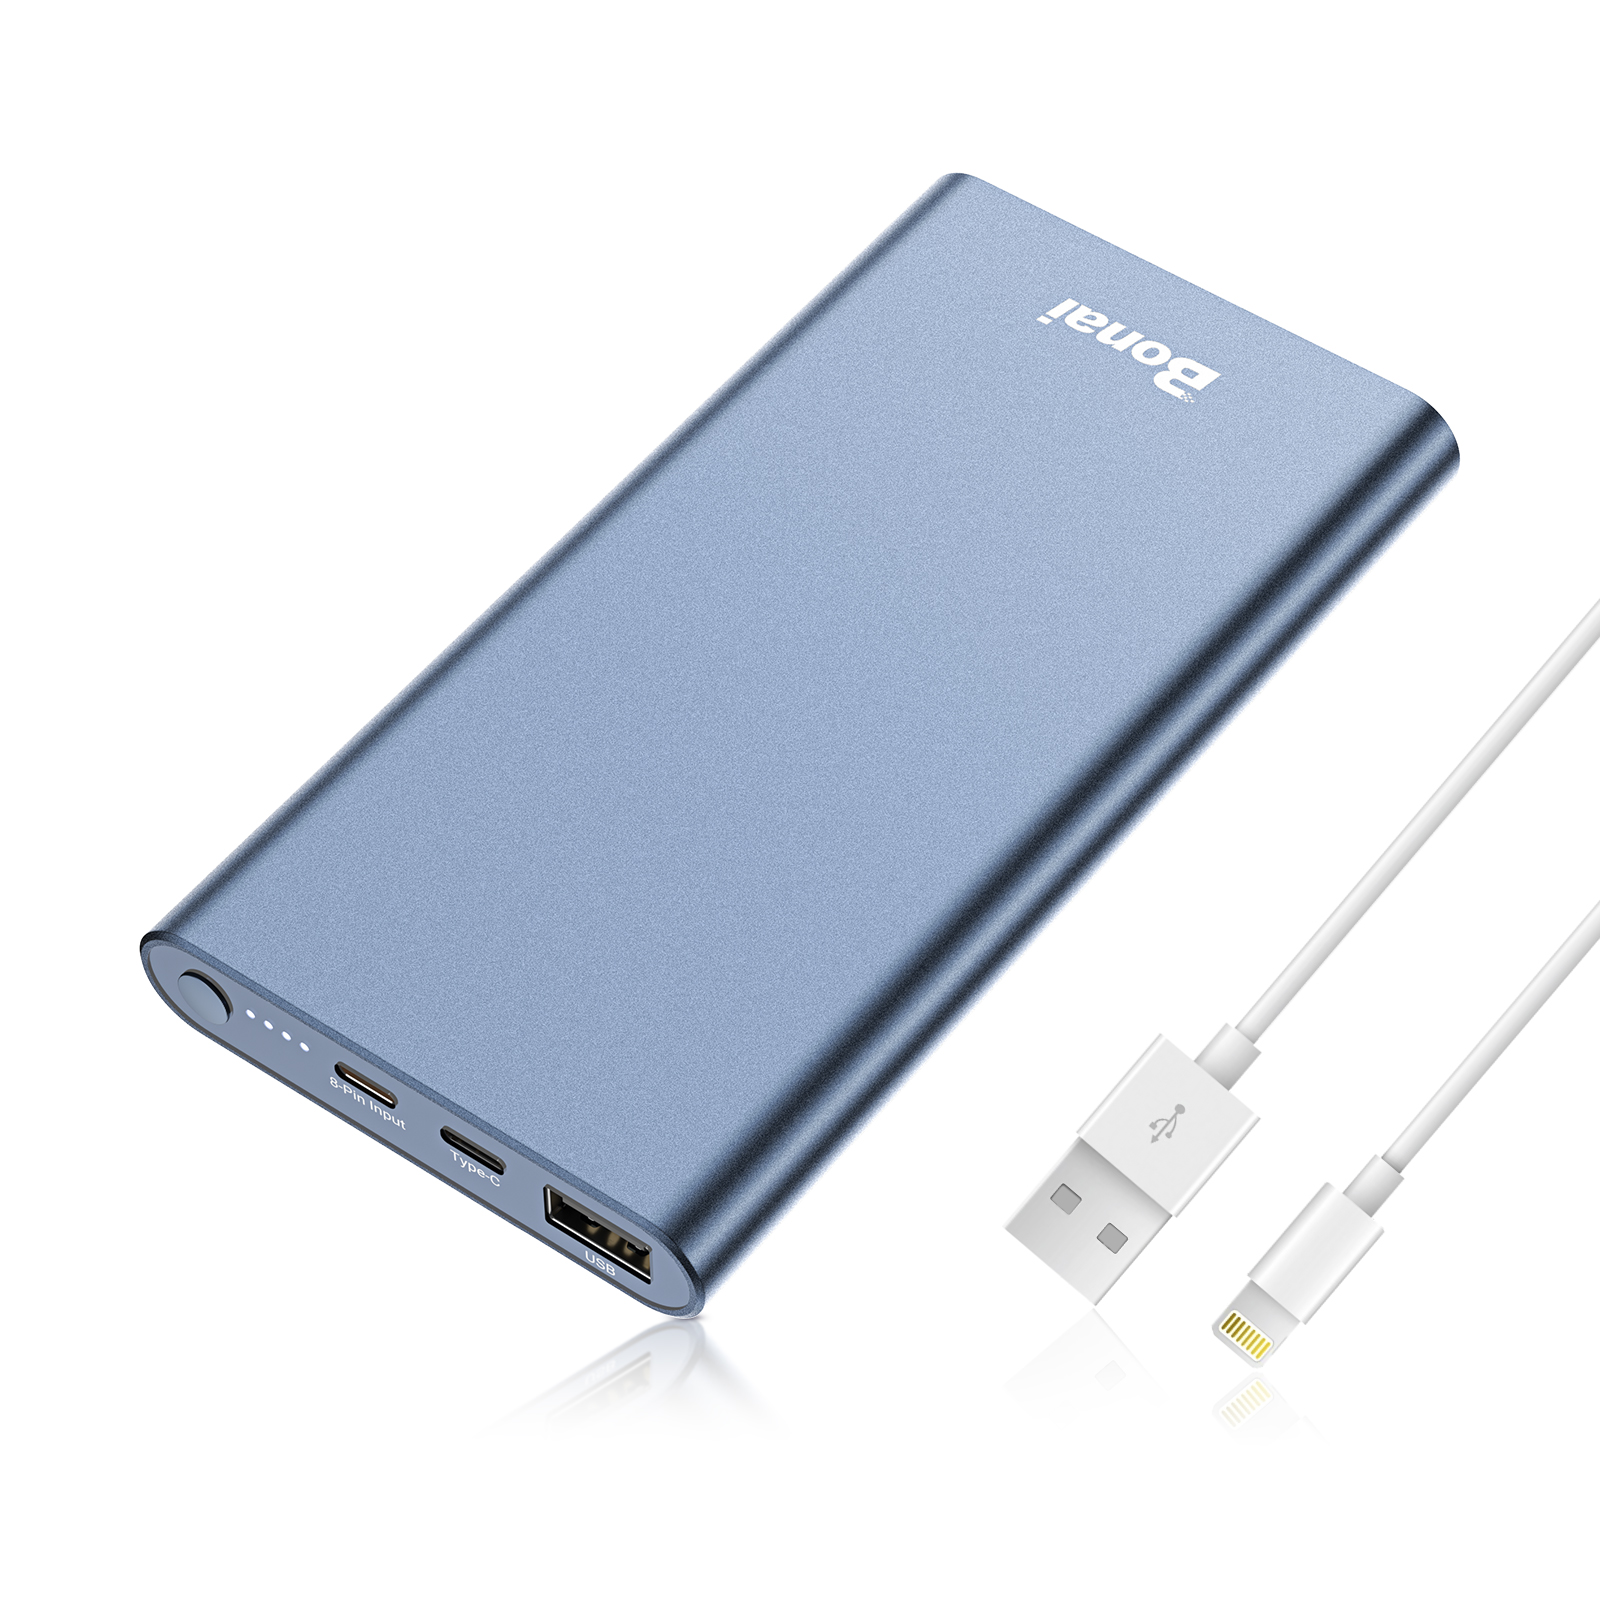 Portable Charger 12000mAh for iPhone 13 Pro Max, Bonai Portable iPhone Charger Airplane Safe USB C High Speed 3.0A IN/OUT Compatible with iPhone 12 (8-pin Charging Cable Included) Blue